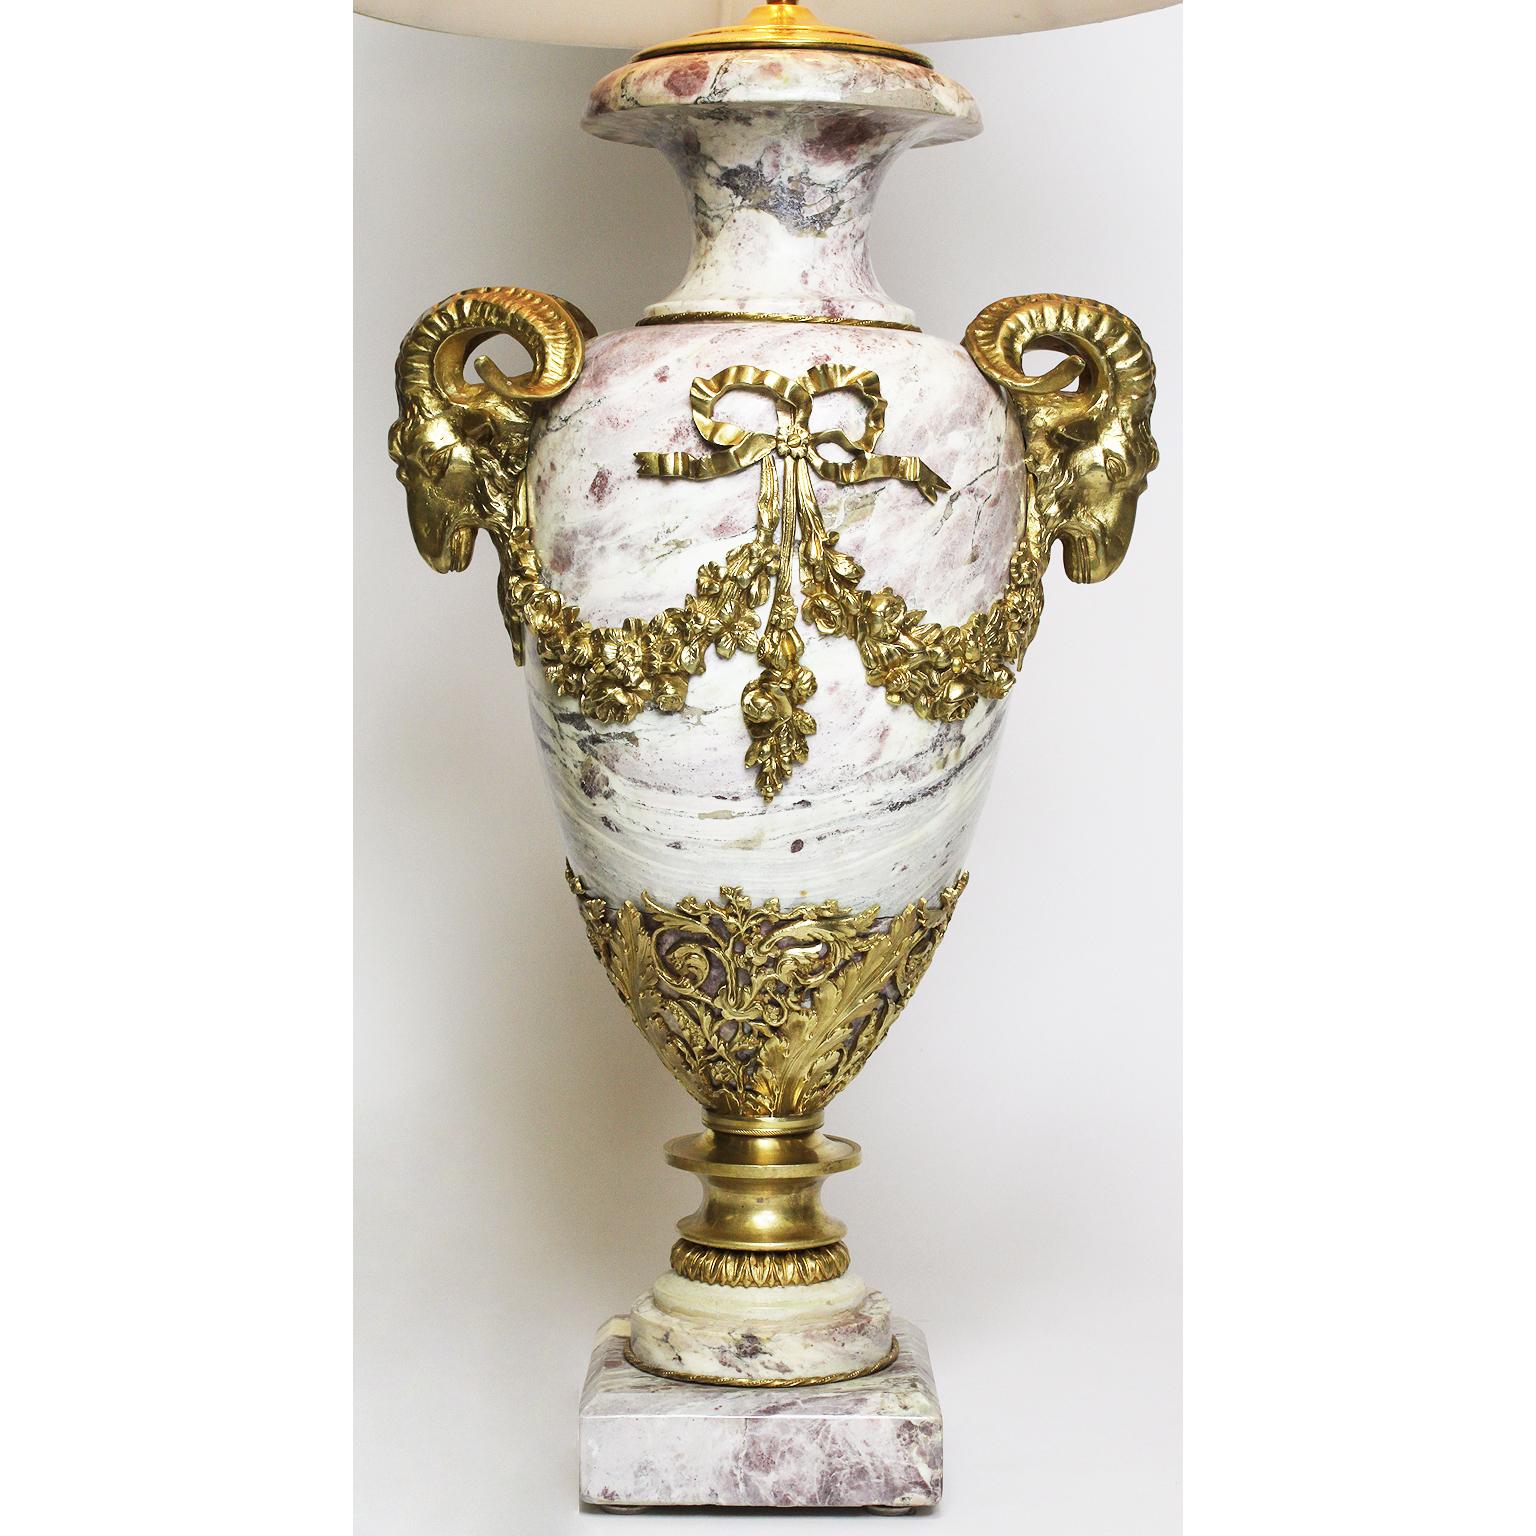 A fine French 19th-20th century Louis XV style Brêche violette marble and gilt bronze-mounted figural urn (Now a lamp). The ovoid marble body surmounted with twin gilt bronze figures of ram heads flanked by floral wreaths with tied ribbons, the base